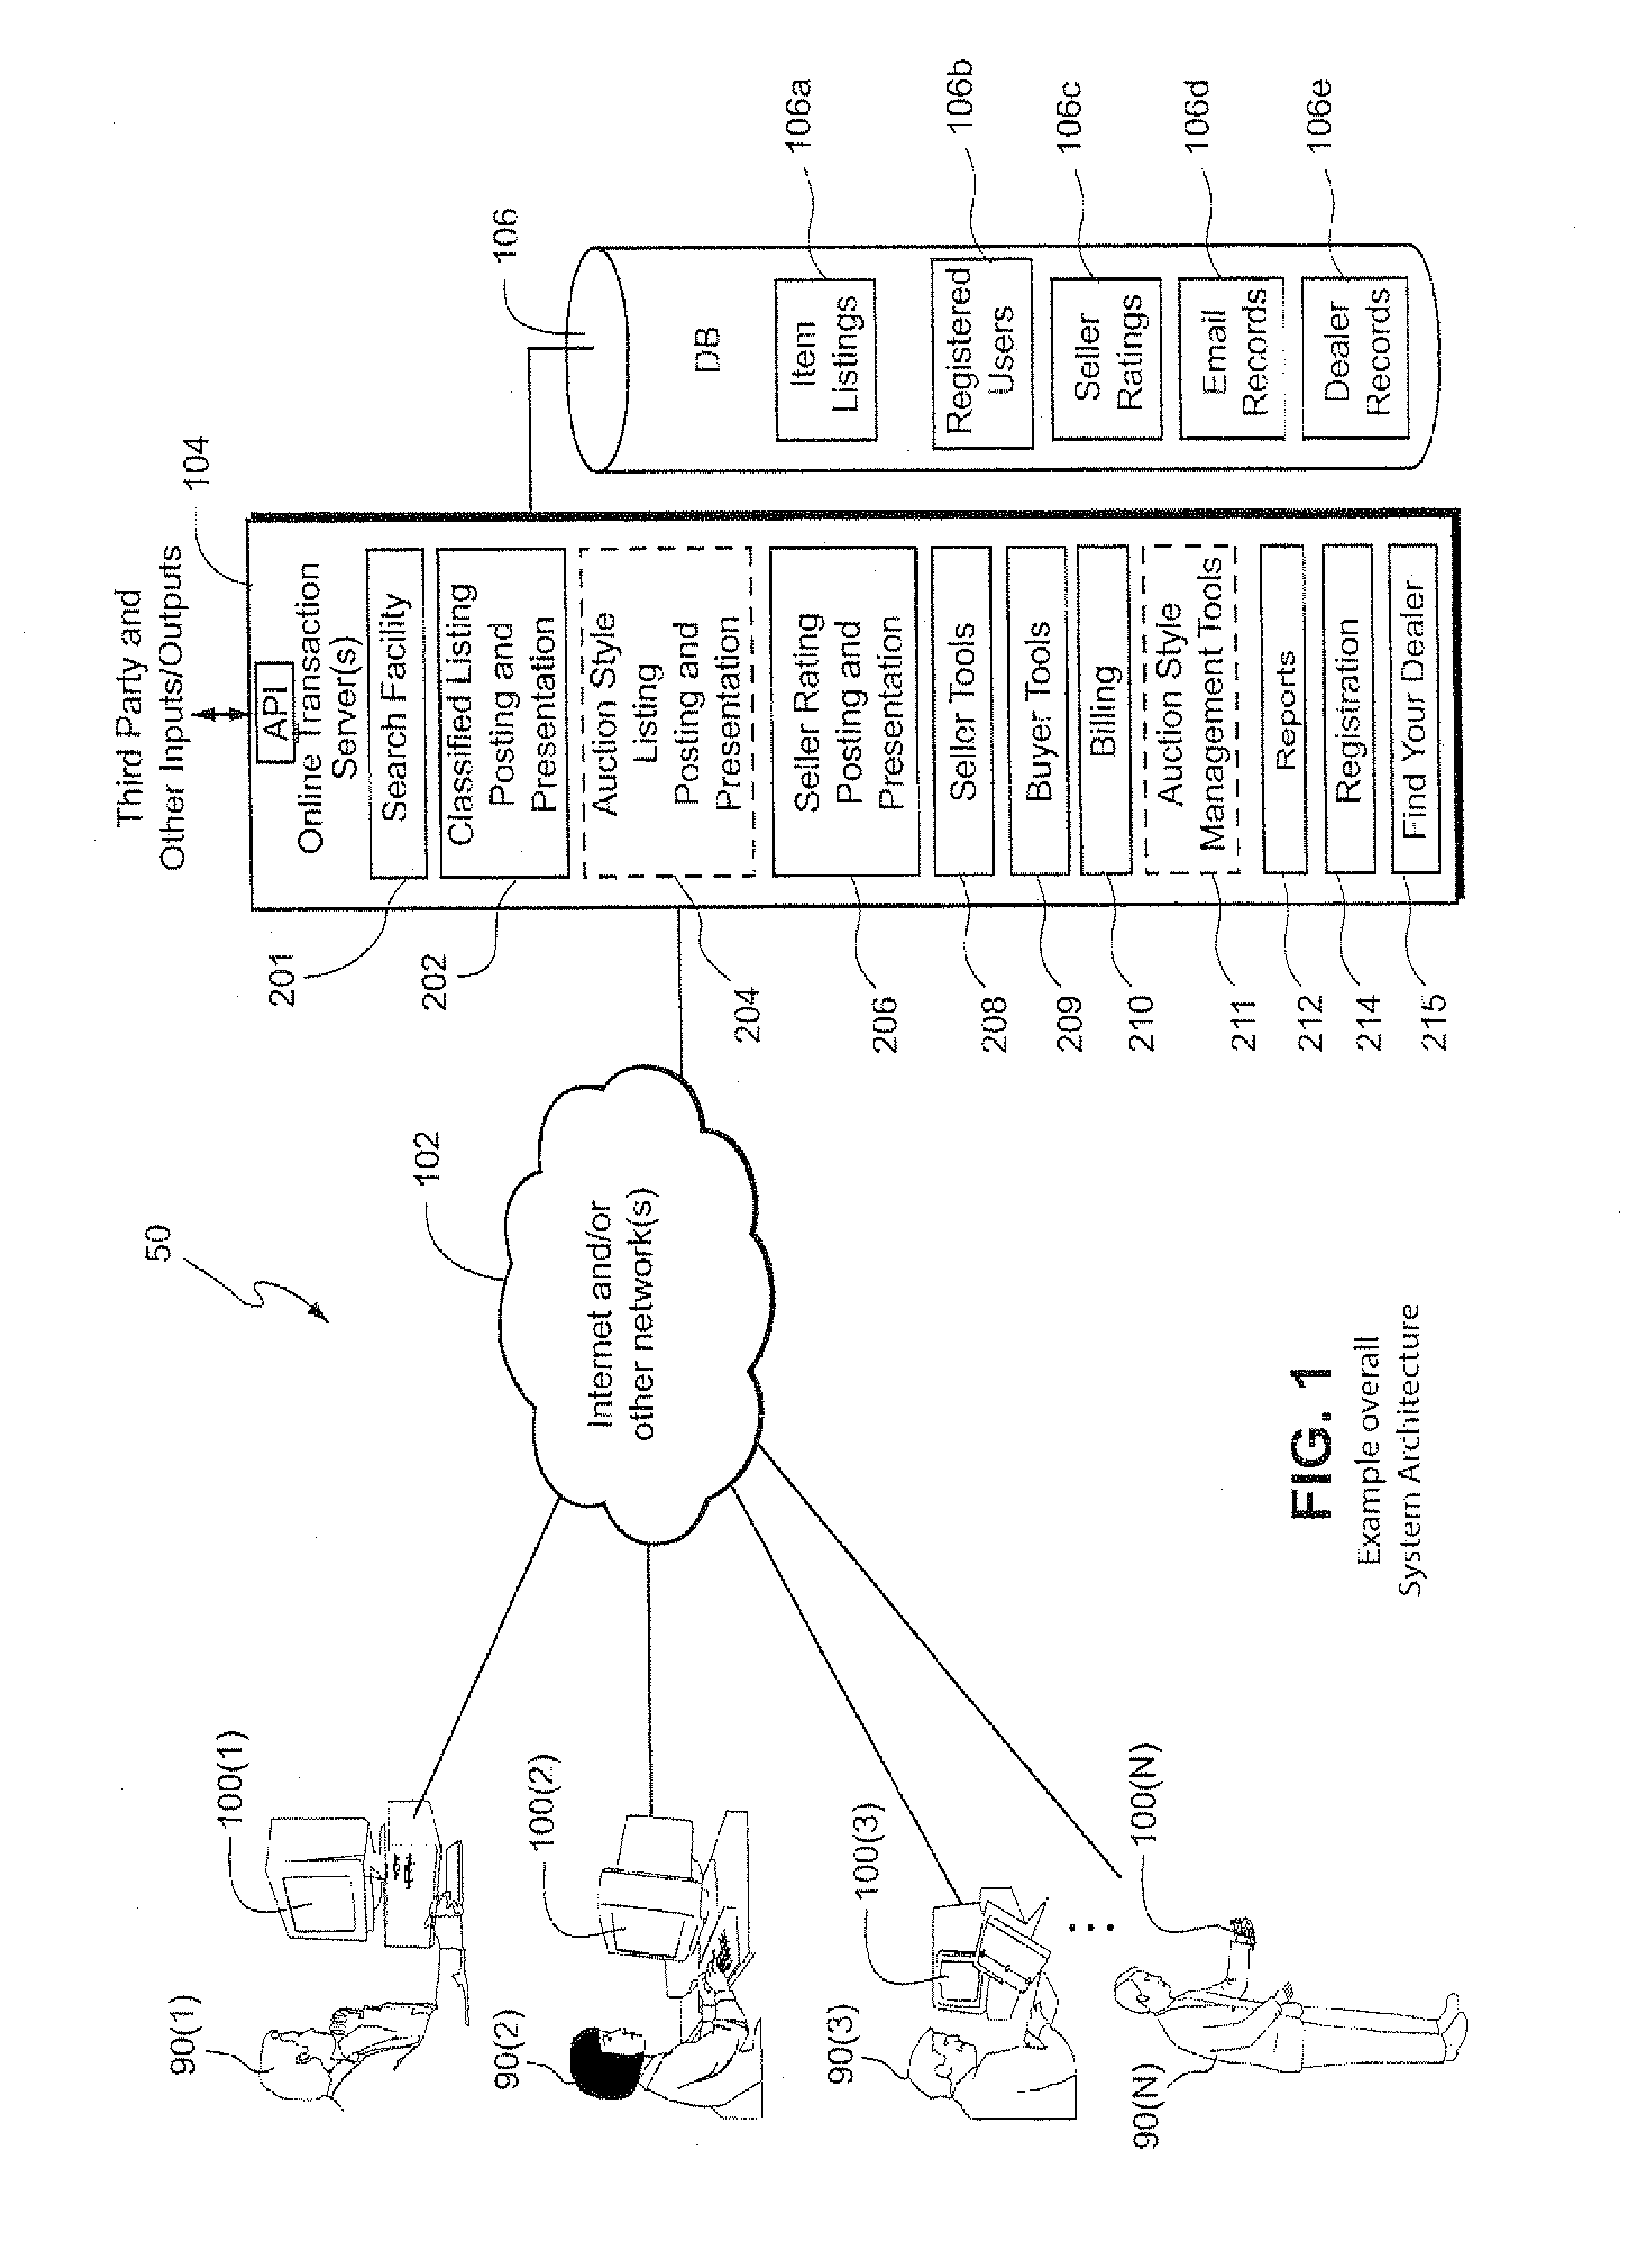 Structured computer-assisted method and apparatus for filtering information presentation